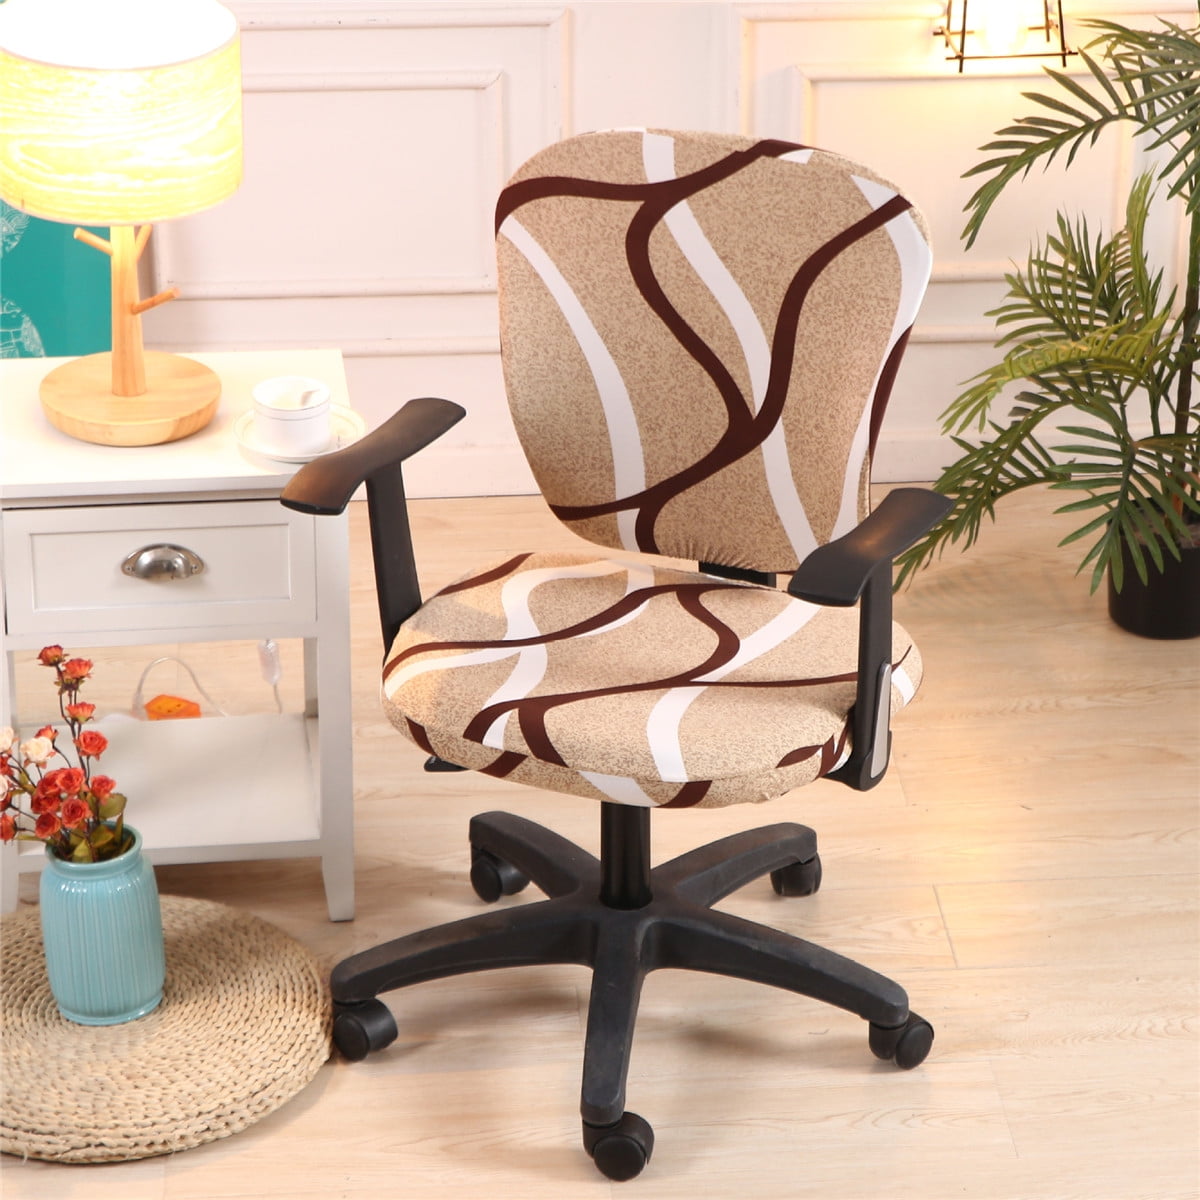 Swivel Chair,Adjustable Chair,Desk Chair,etc Small Yiwant Stretch Removable Washable Office Chair Cover Protector Seat Slipcover for Low-Back Computer Chair Style #1